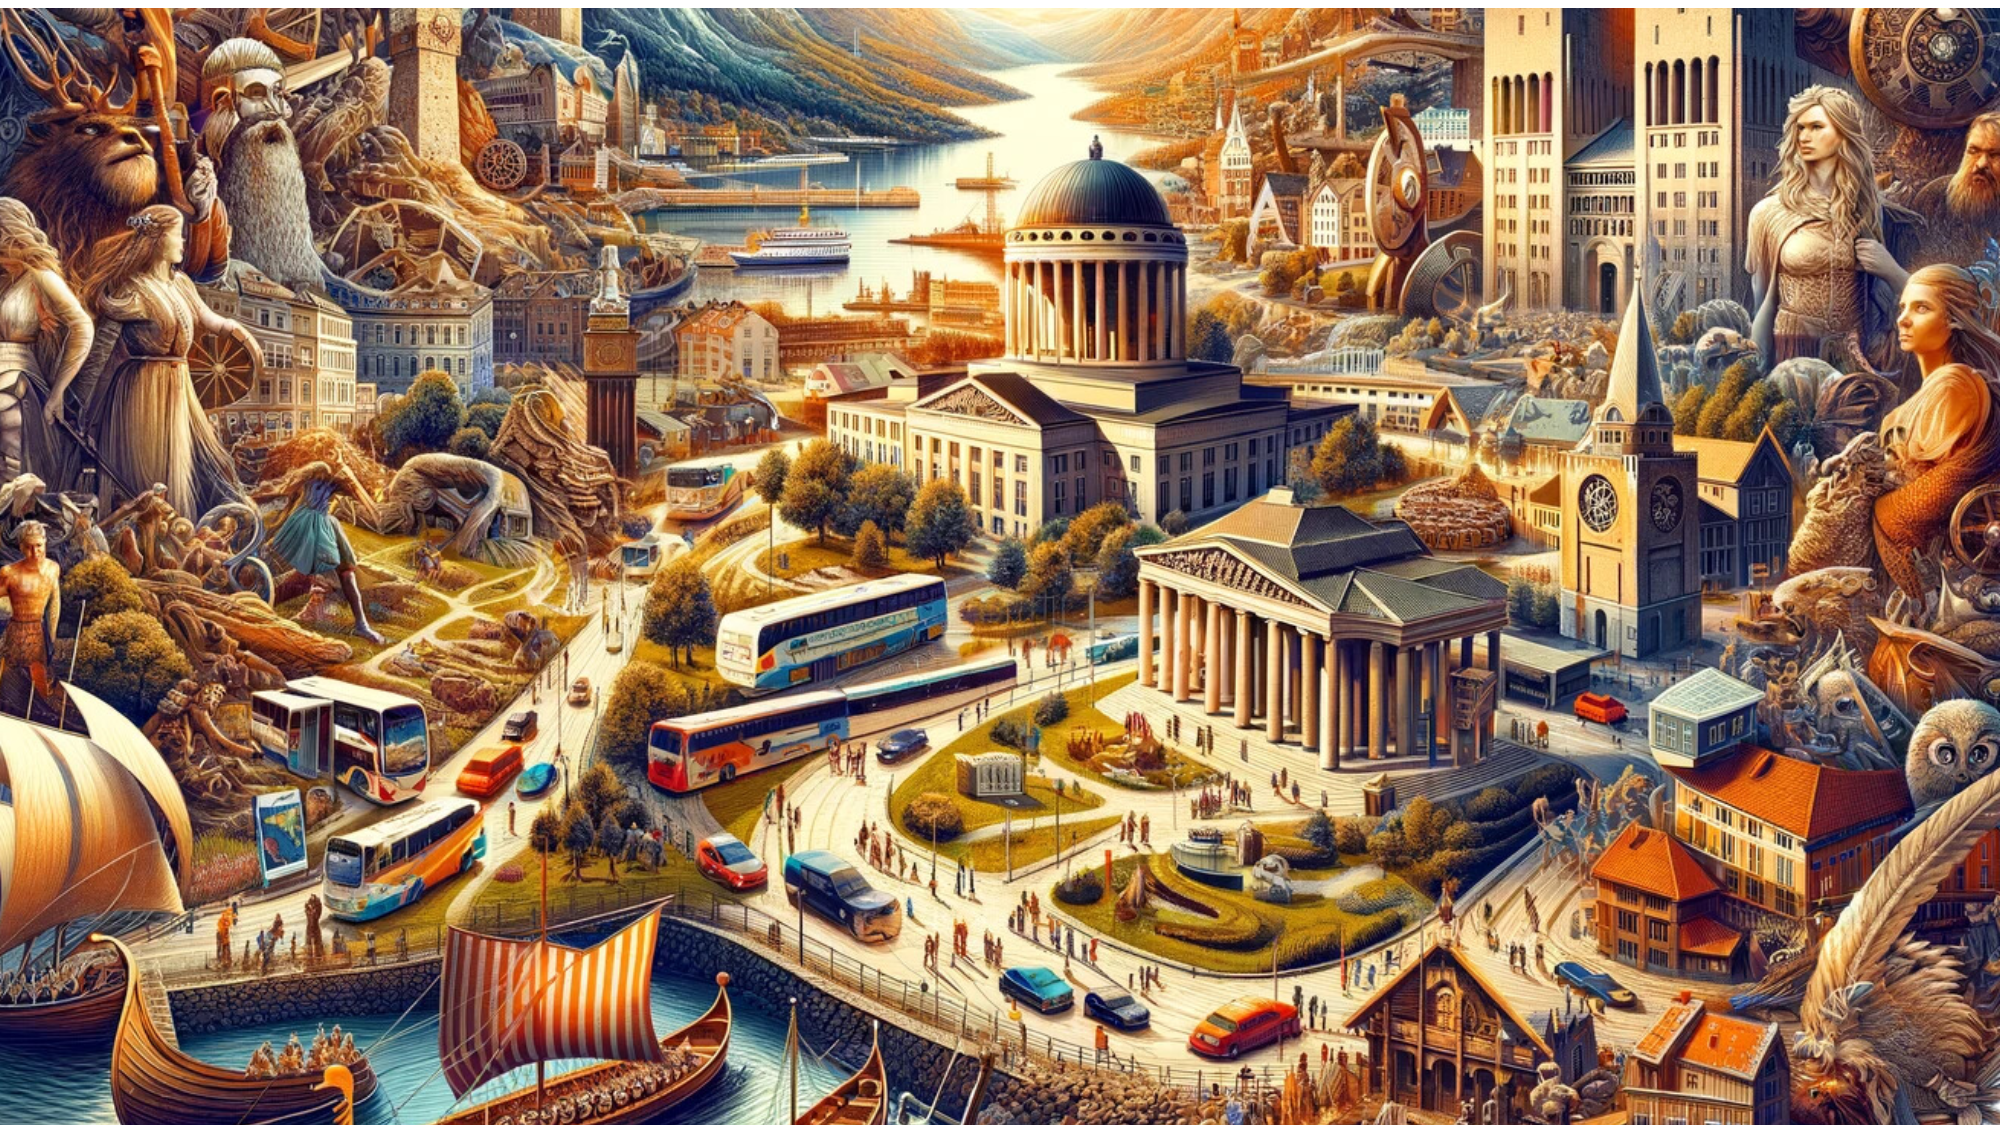 "Artistic collage of Oslo with Viking ships, historical architecture, and modern transit."